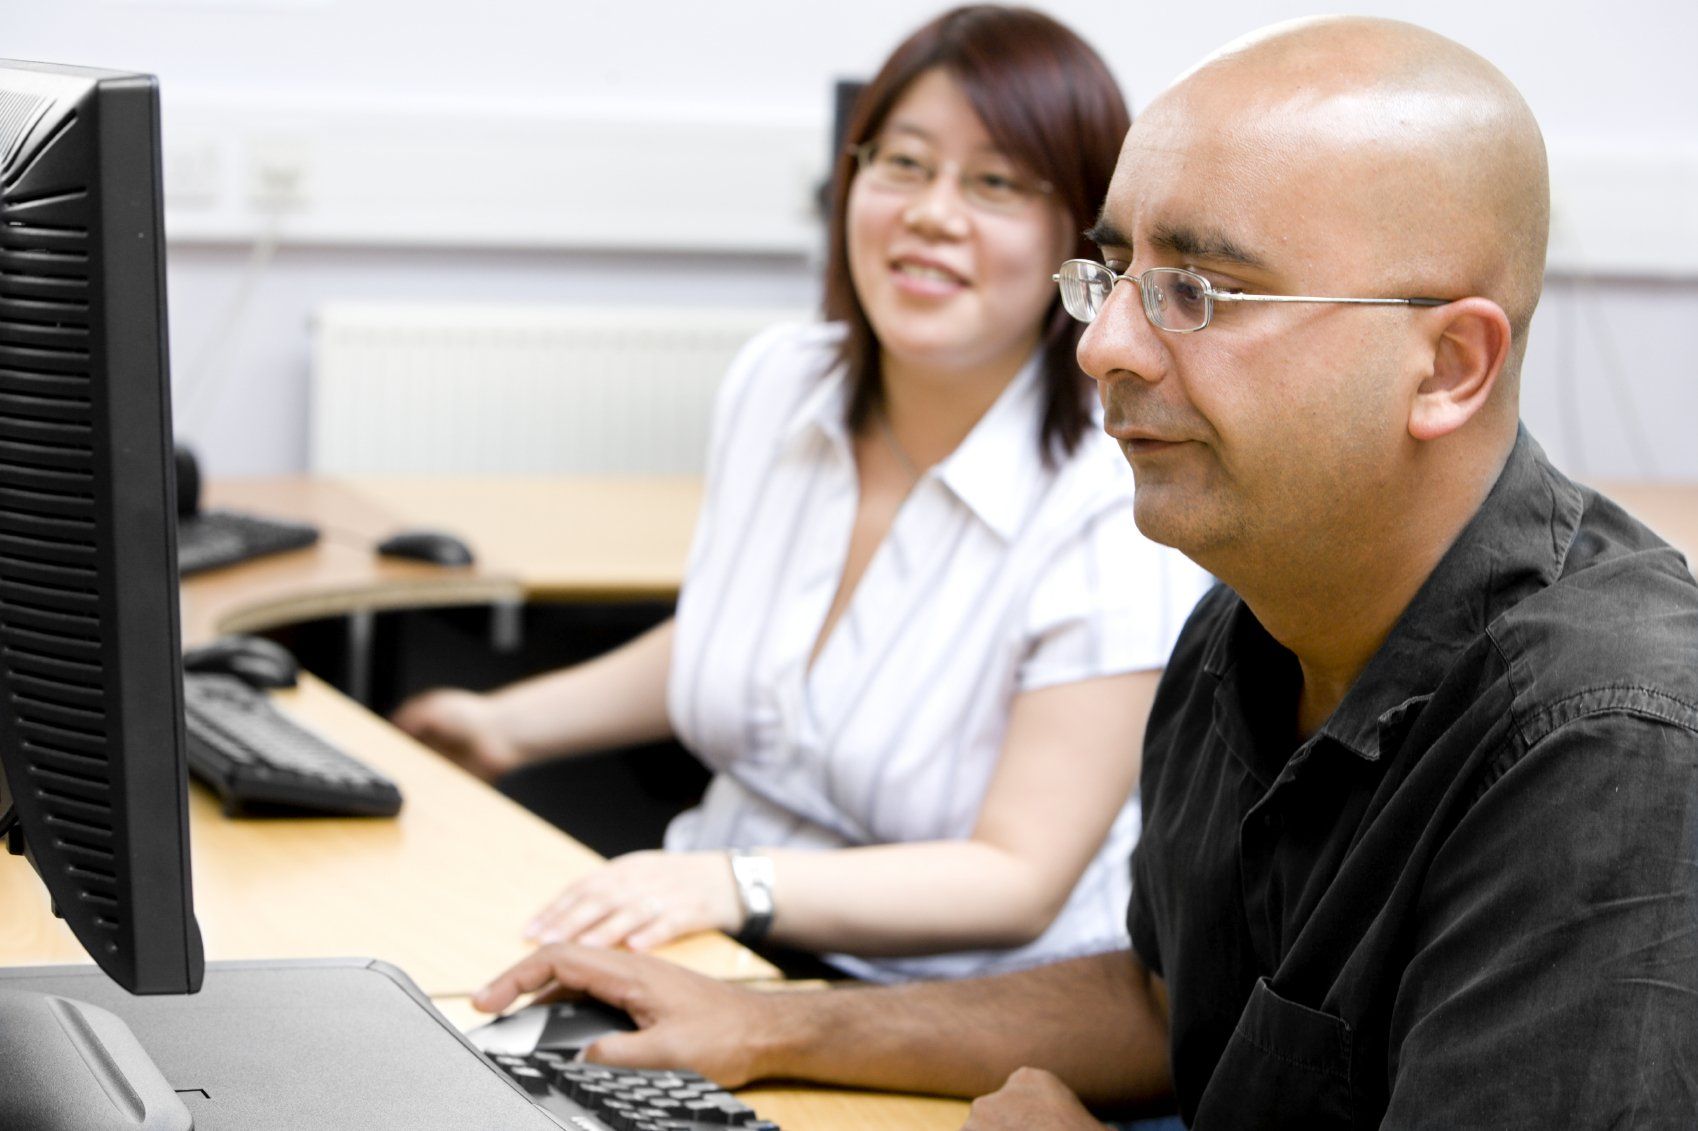 Bald man in black shirt sitting at computer with a smiling, Asian woman.